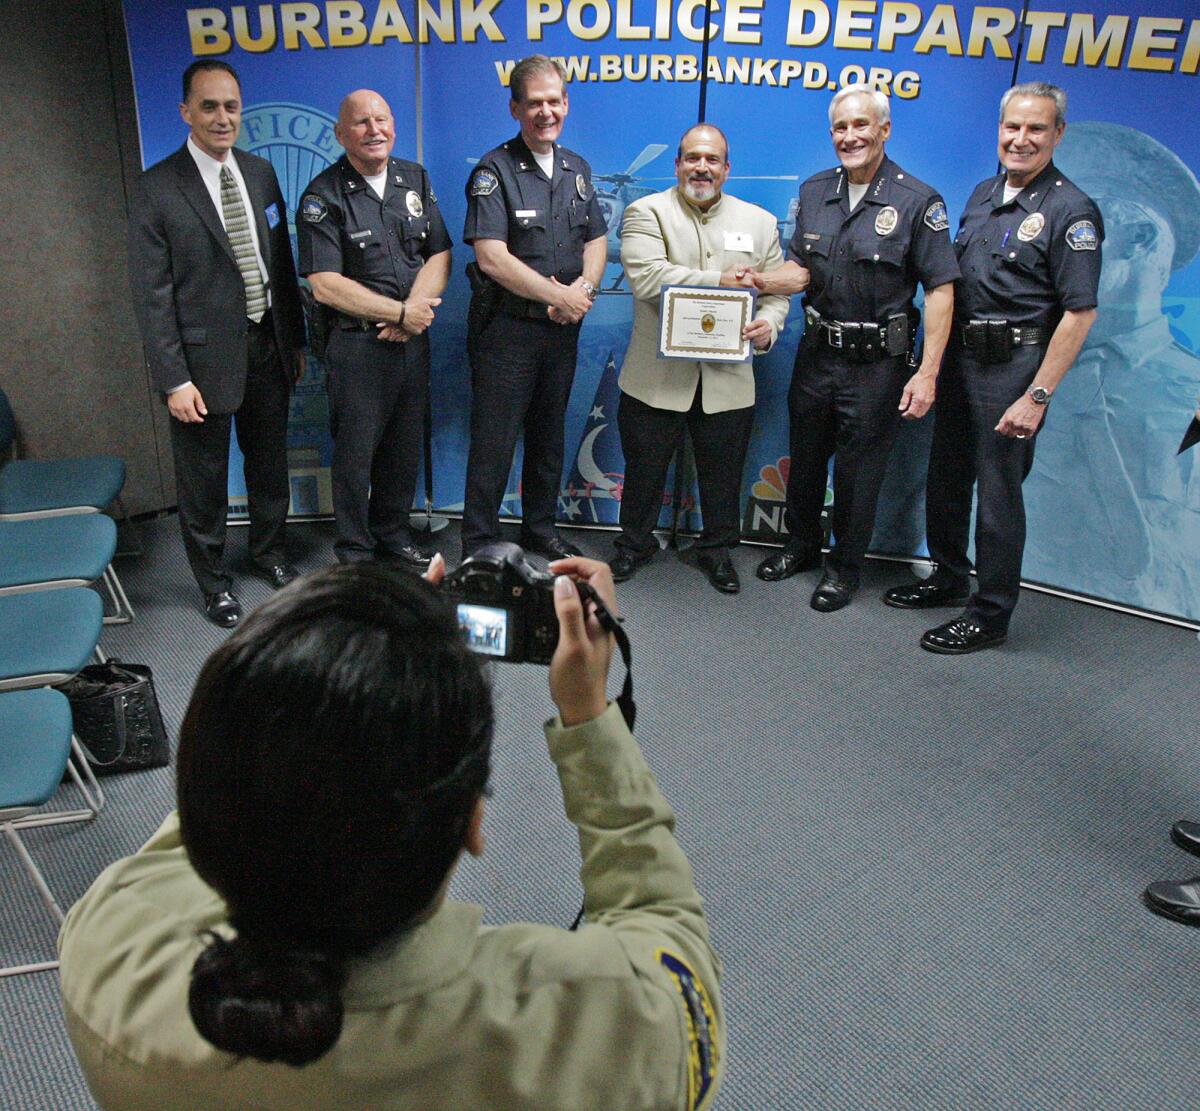 Robert Vincent stands with Police Chief Scott LaChasse and his members of his staff for a photo at the Burbank Police Department for the BPD Community Academy graduation ceremony on Thursday, November 13, 2014. The 28th class is the largest class the BPD has graduated.